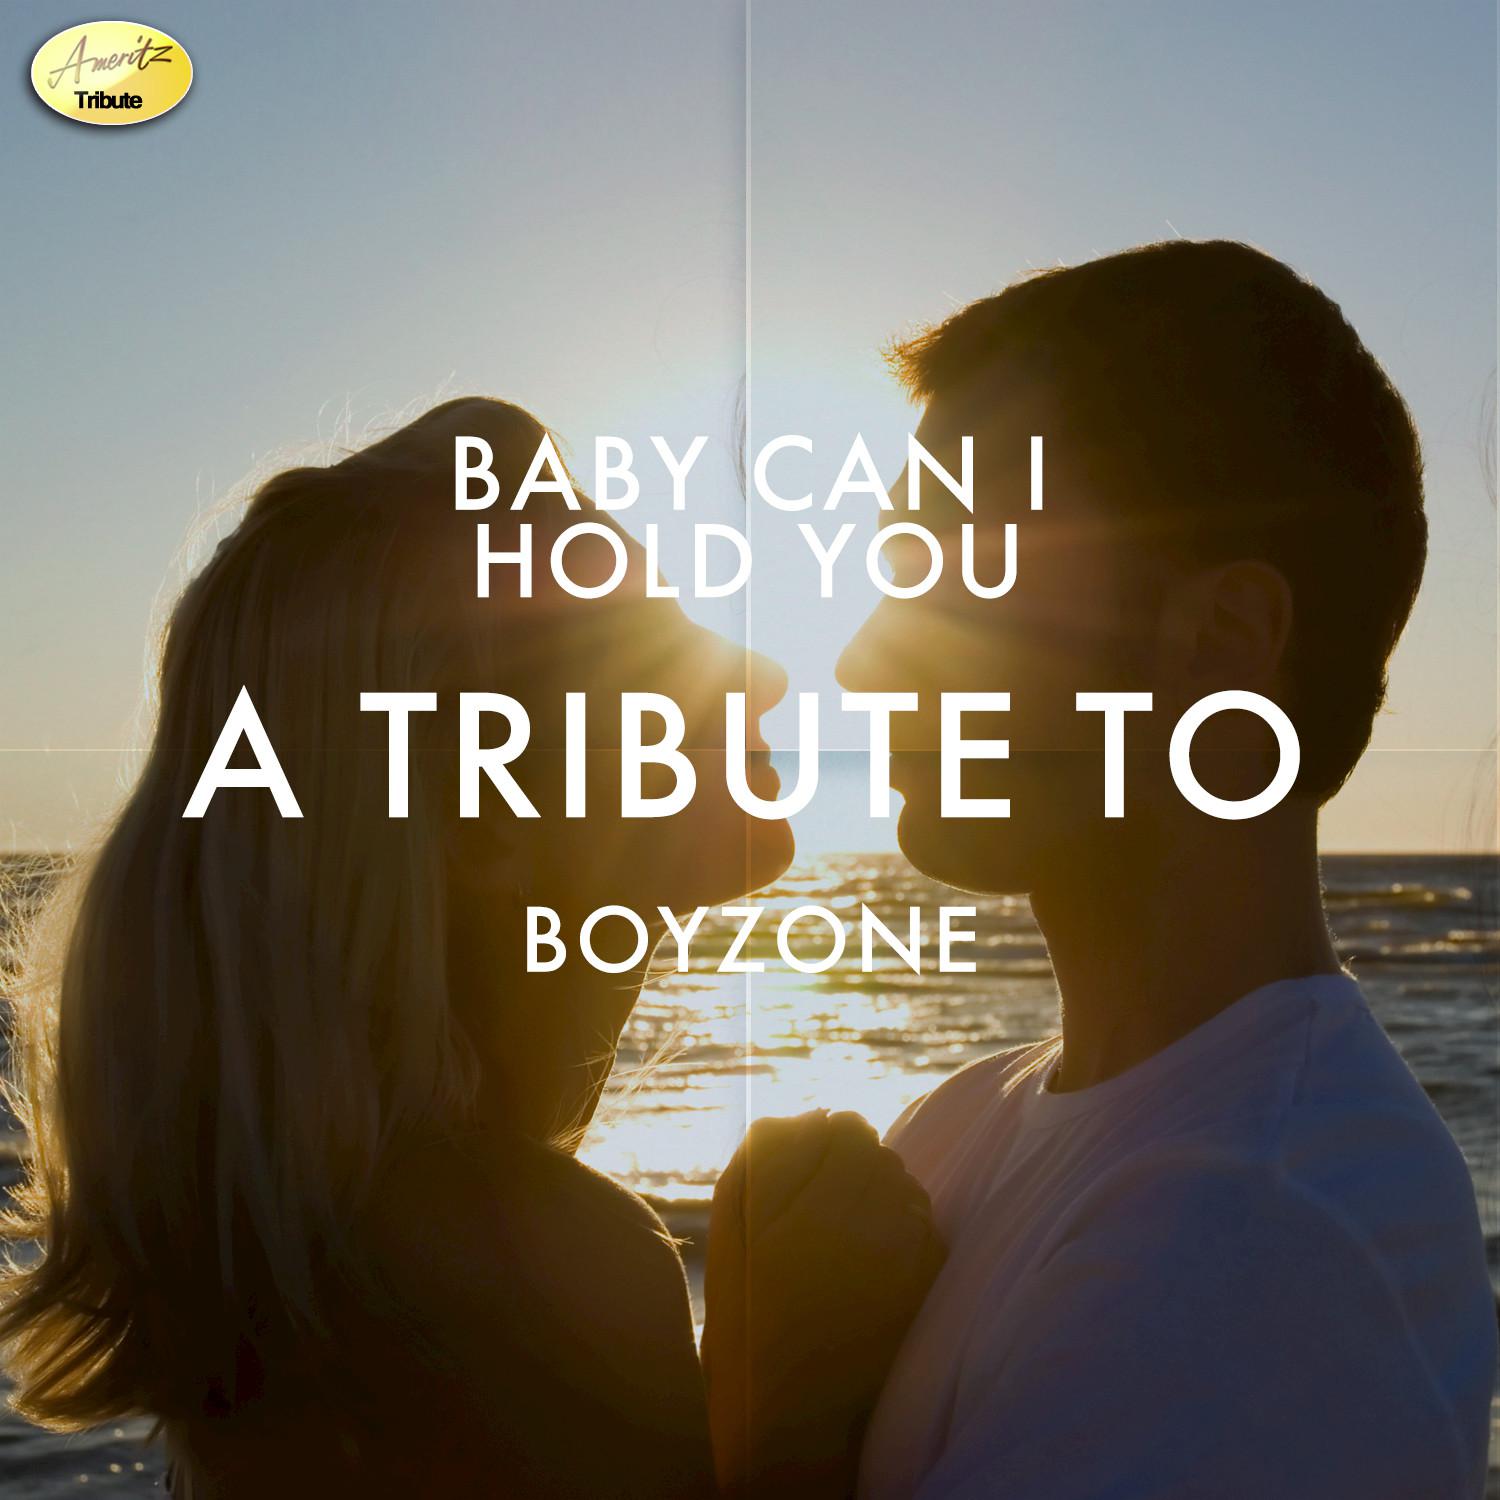 Baby Can I Hold You: A Tribute to Boyzone